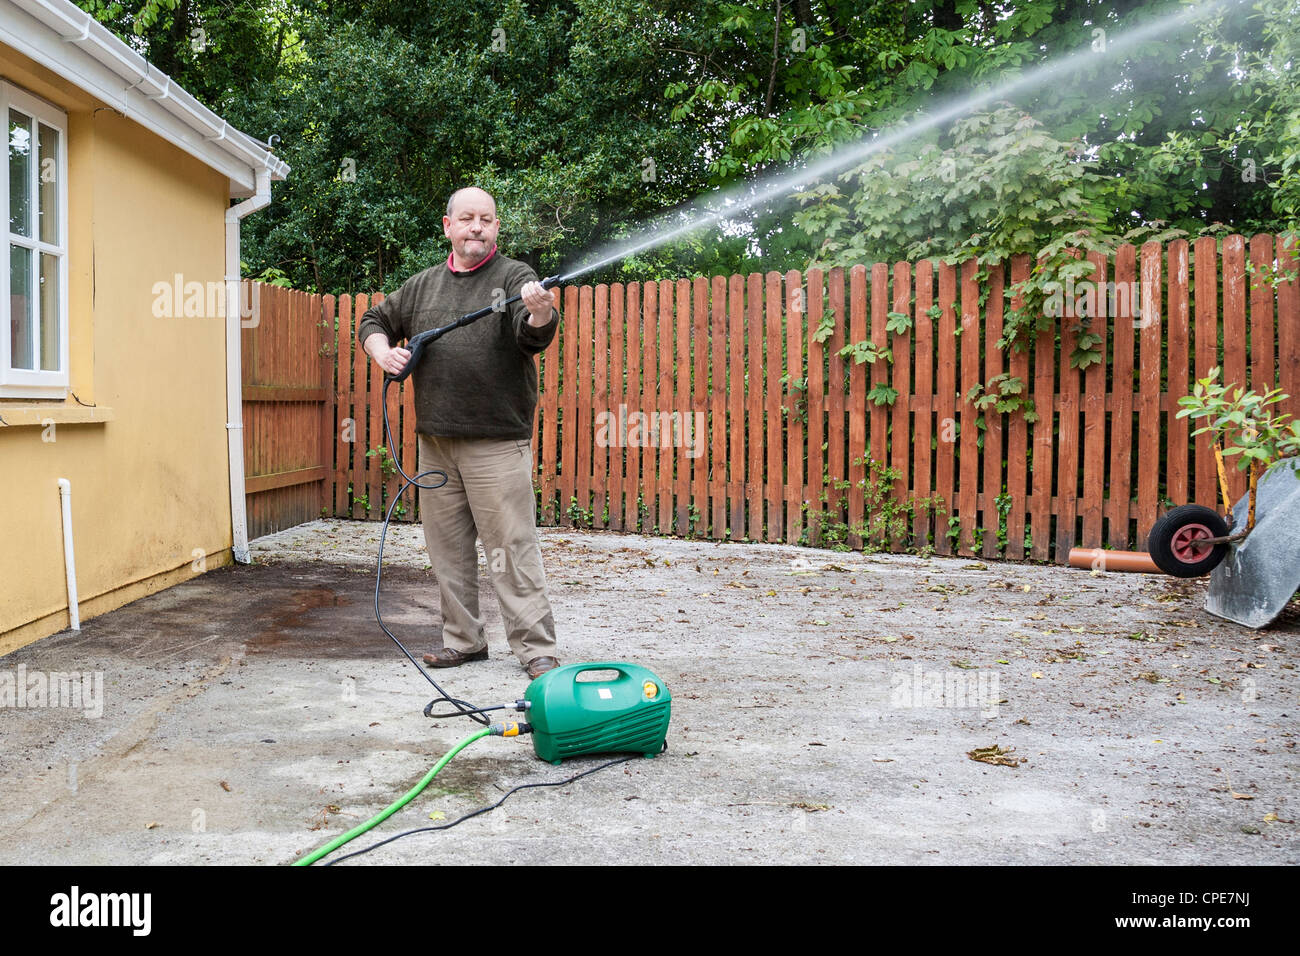 Man with garden hose pipe Stock Photo